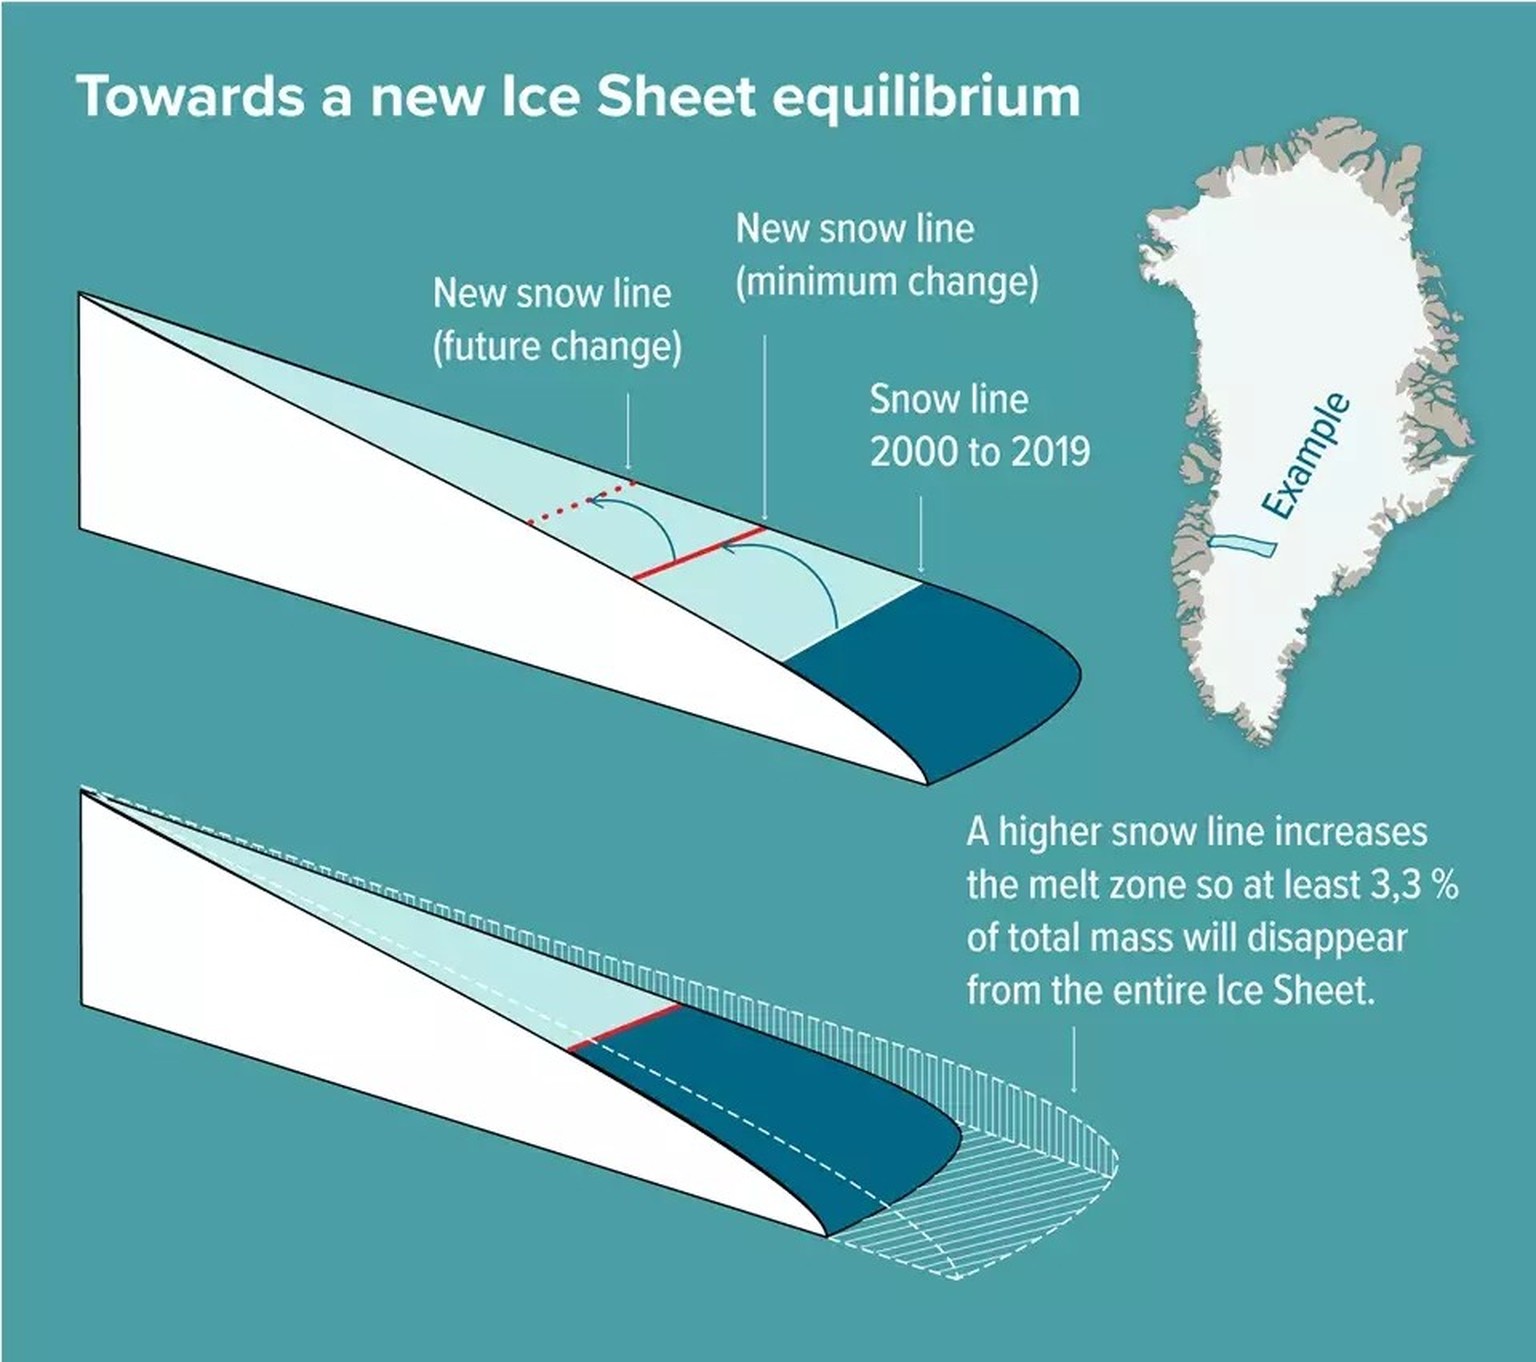 In the recent (2000–2019) climate, the Greenland ice has built up a disequilibrium which will inevitably correct itself by reducing total mass by at least 3.3 percent in order to regain equilibrium at ...